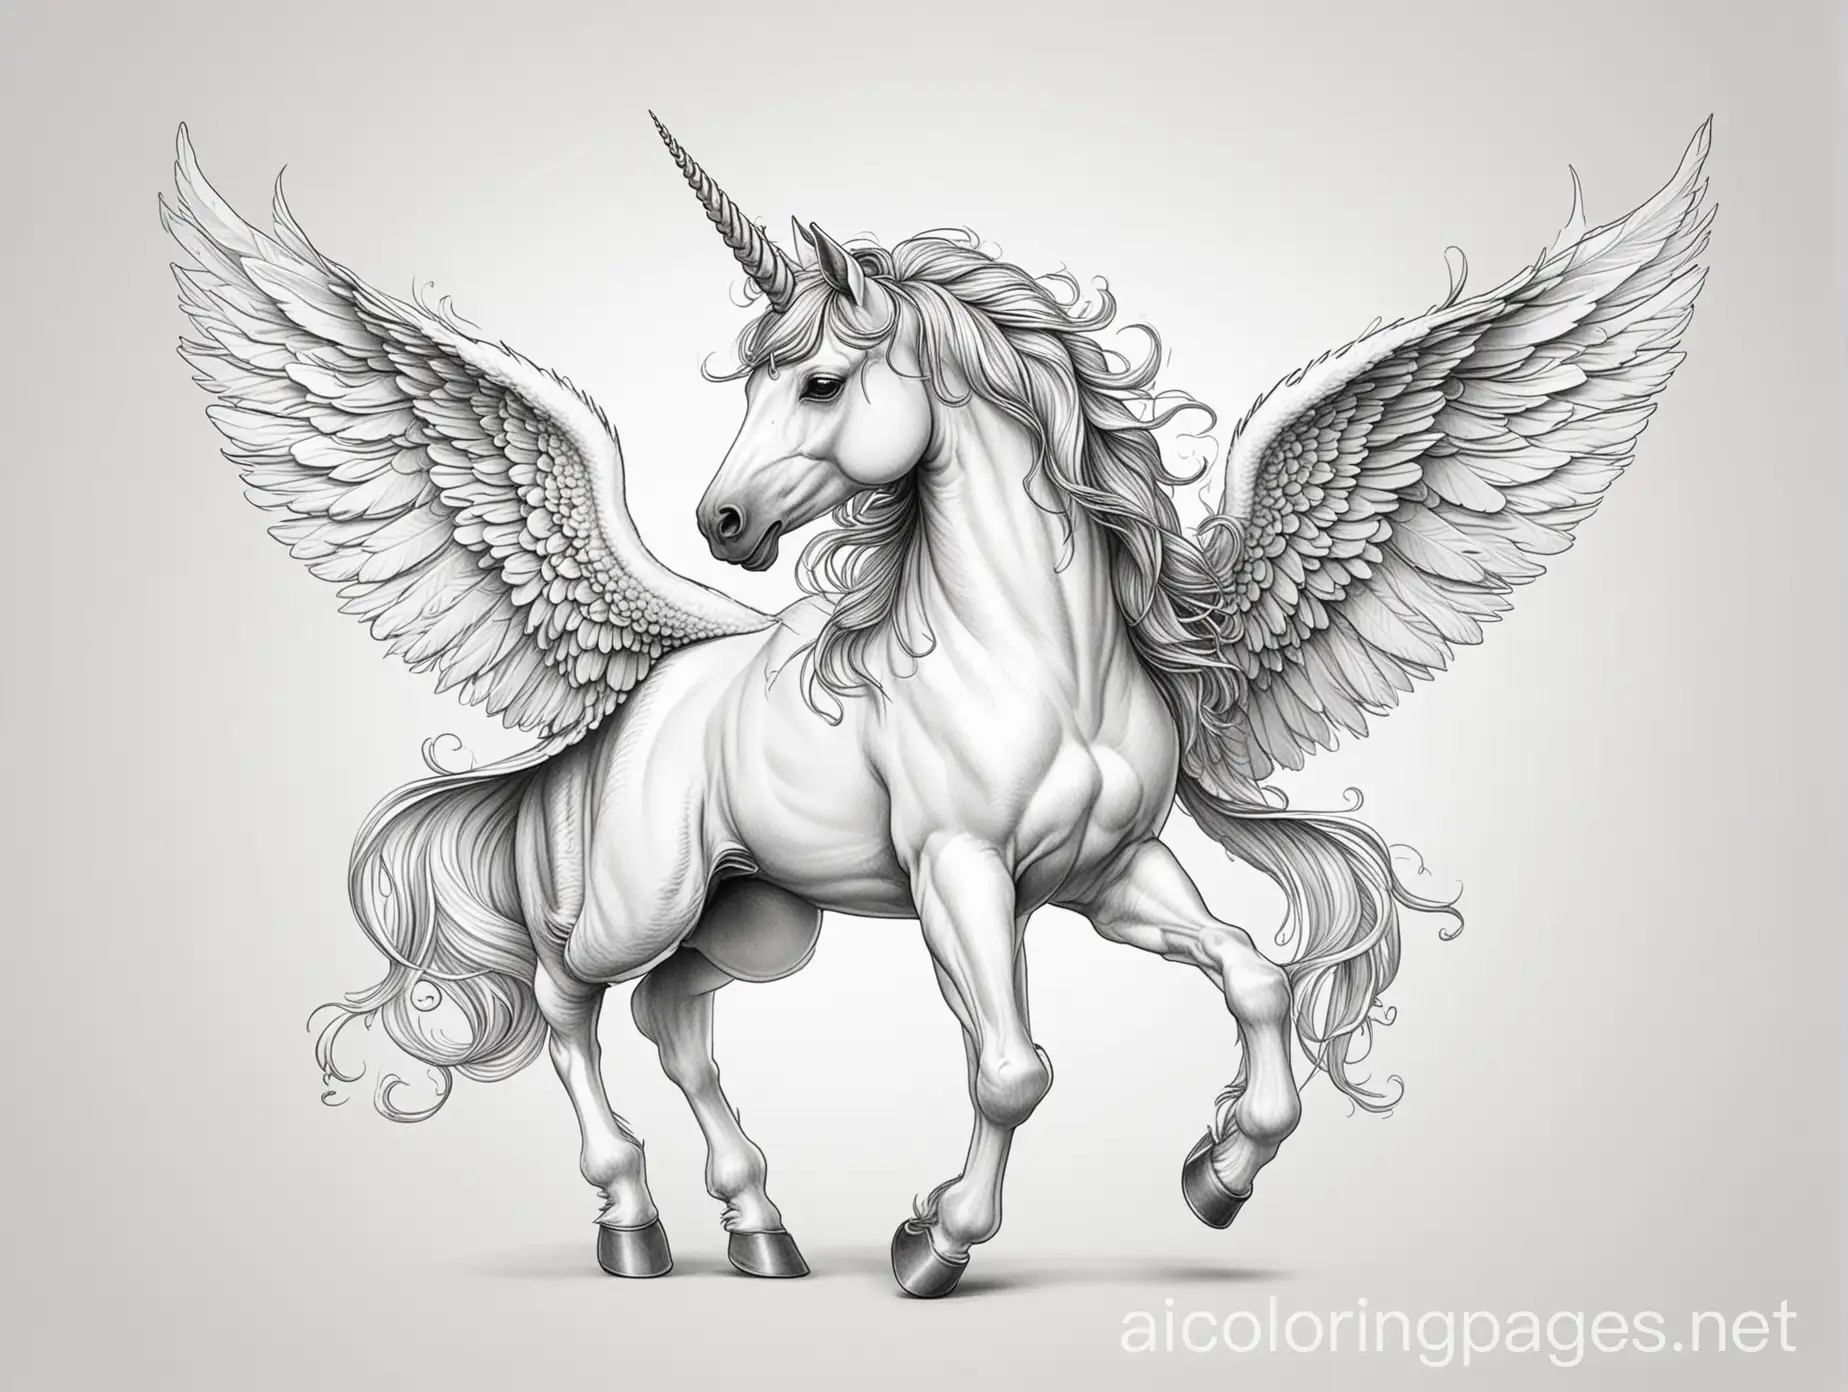 unicorn with wings, Coloring Page, black and white, line art, white background, Simplicity, Ample White Space. The background of the coloring page is plain white to make it easy for young children to color within the lines. The outlines of all the subjects are easy to distinguish, making it simple for kids to color without too much difficulty